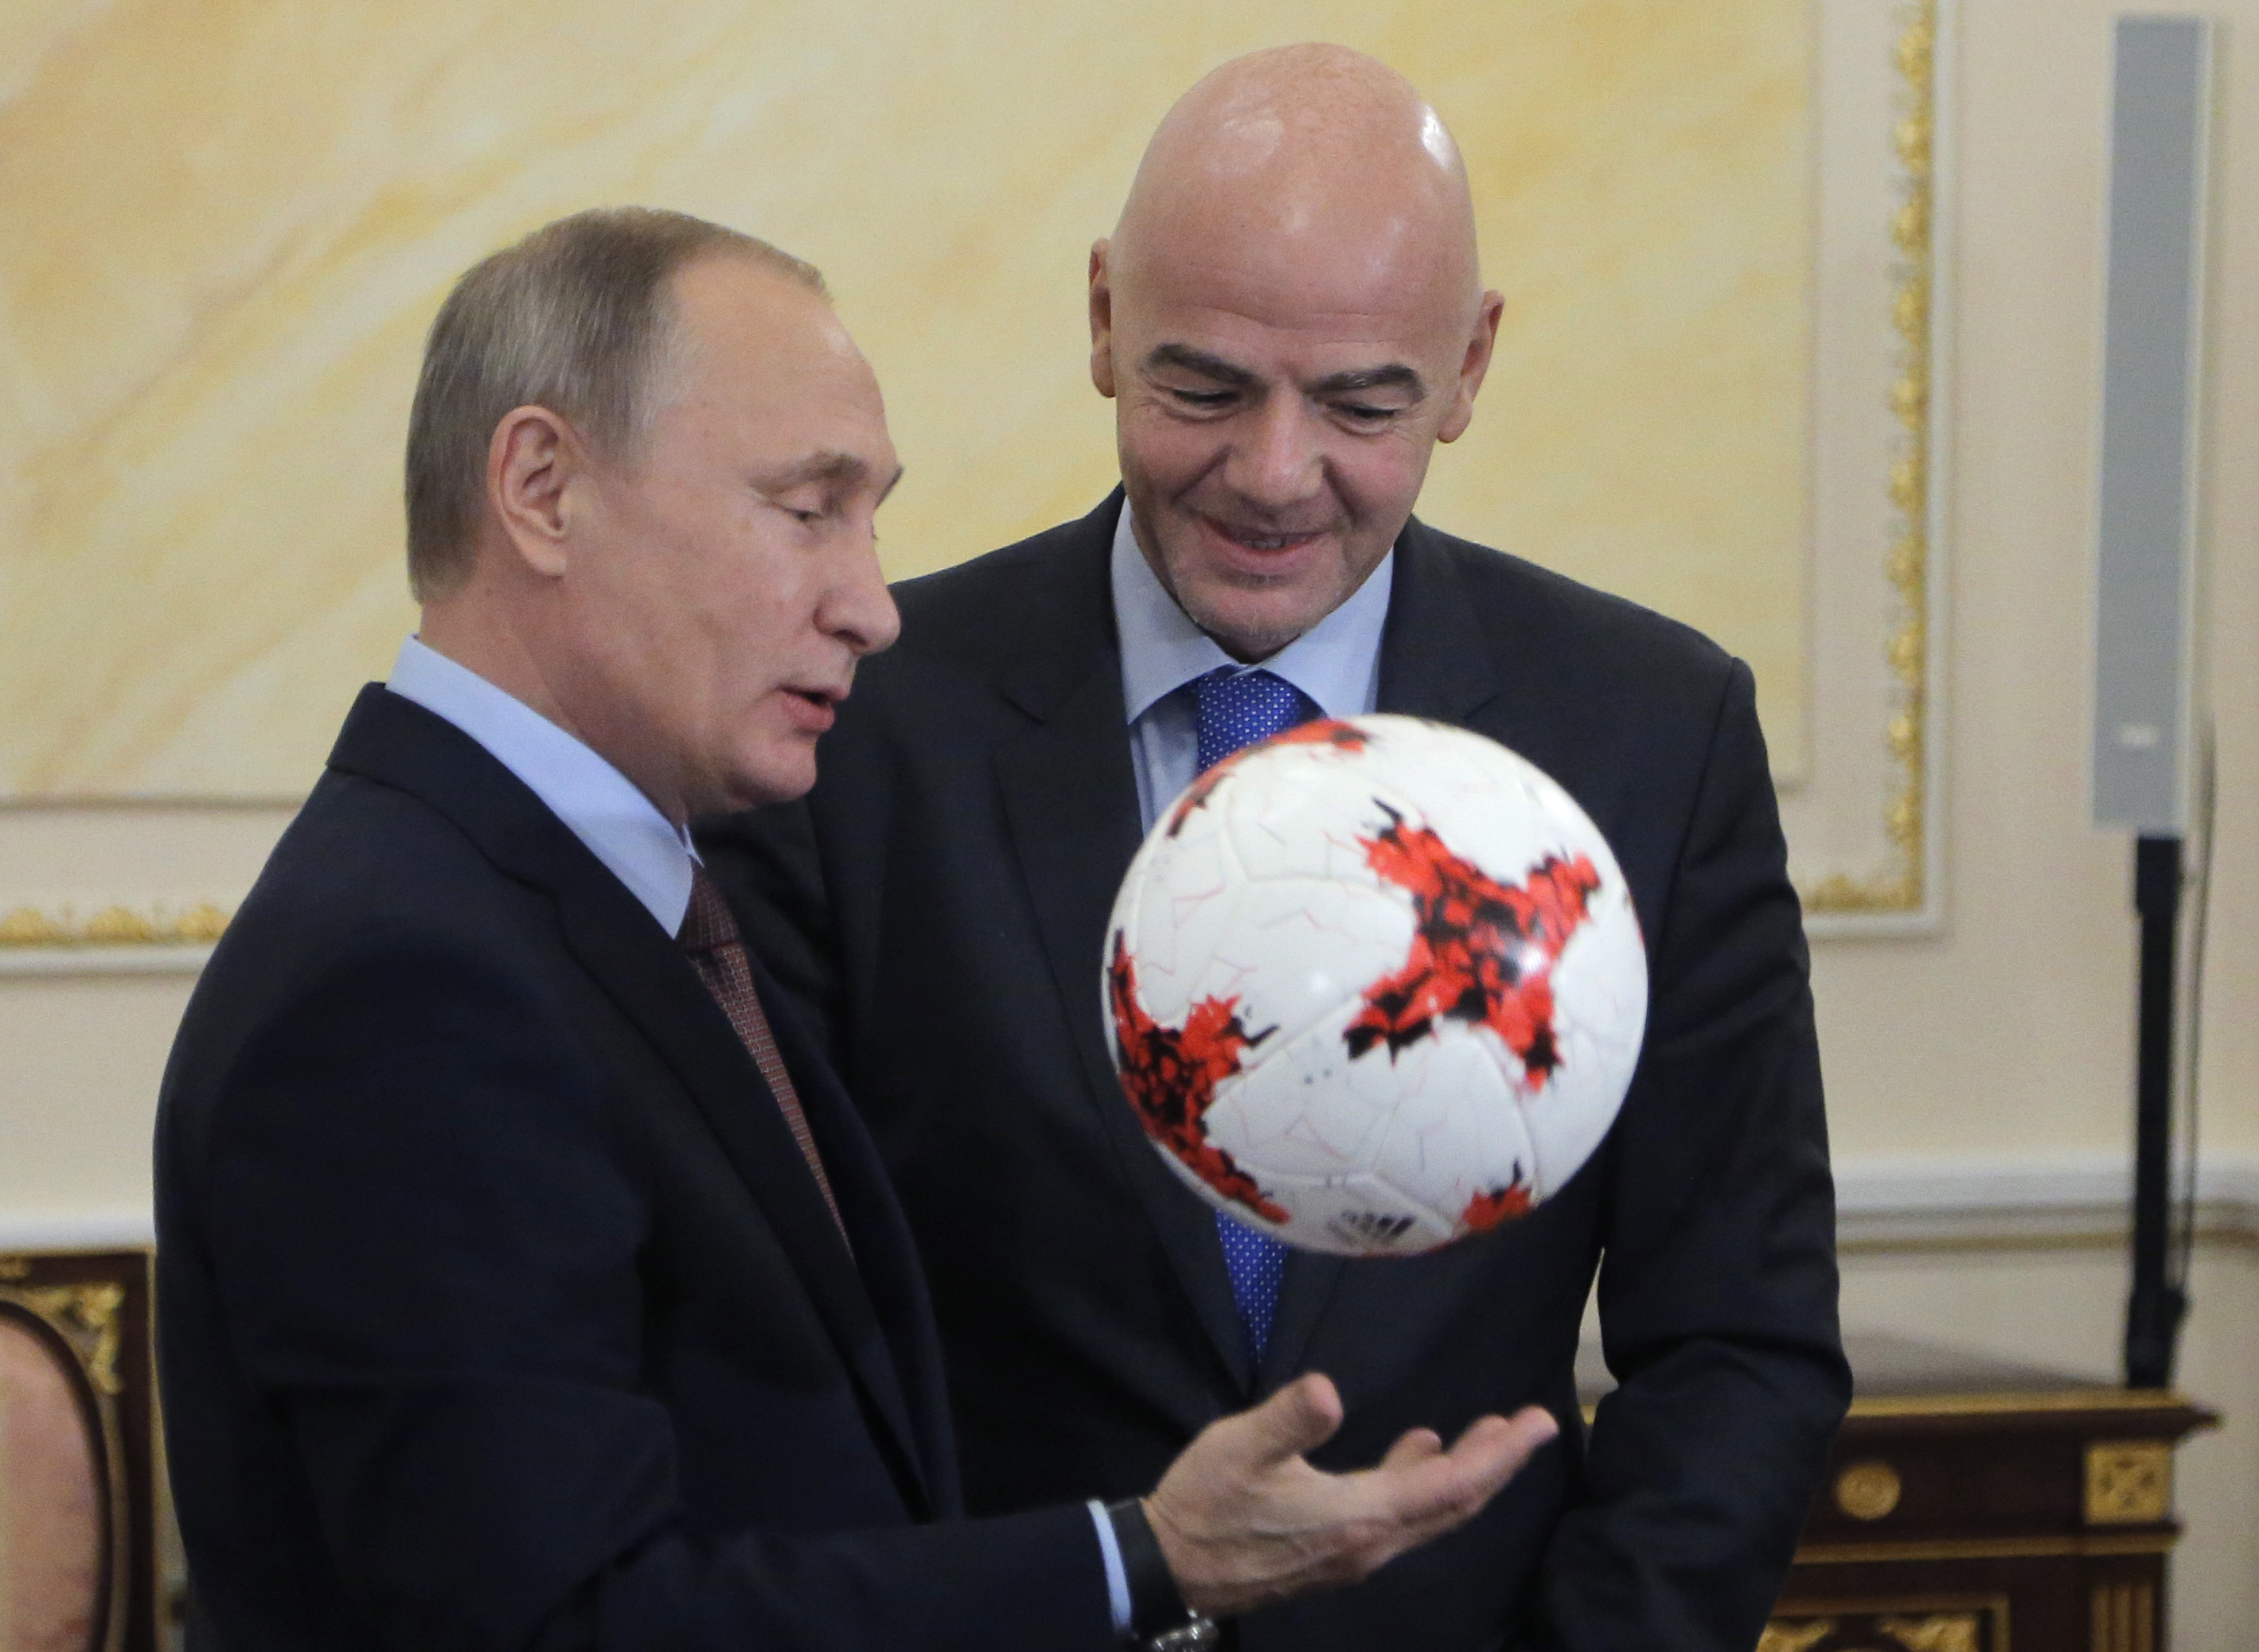 Russian President Vladimir Putin plays with an official match ball for the 2017 FIFA Confederations Cup, named "Krasava", as he meets with FIFA president Gianni Infantino at the Kremlin in Moscow on November 25, 2016 on the eve of the 2017 Confederations Cup draw to be held in Kazan. / AFP PHOTO / POOL / Maxim Shipenkov